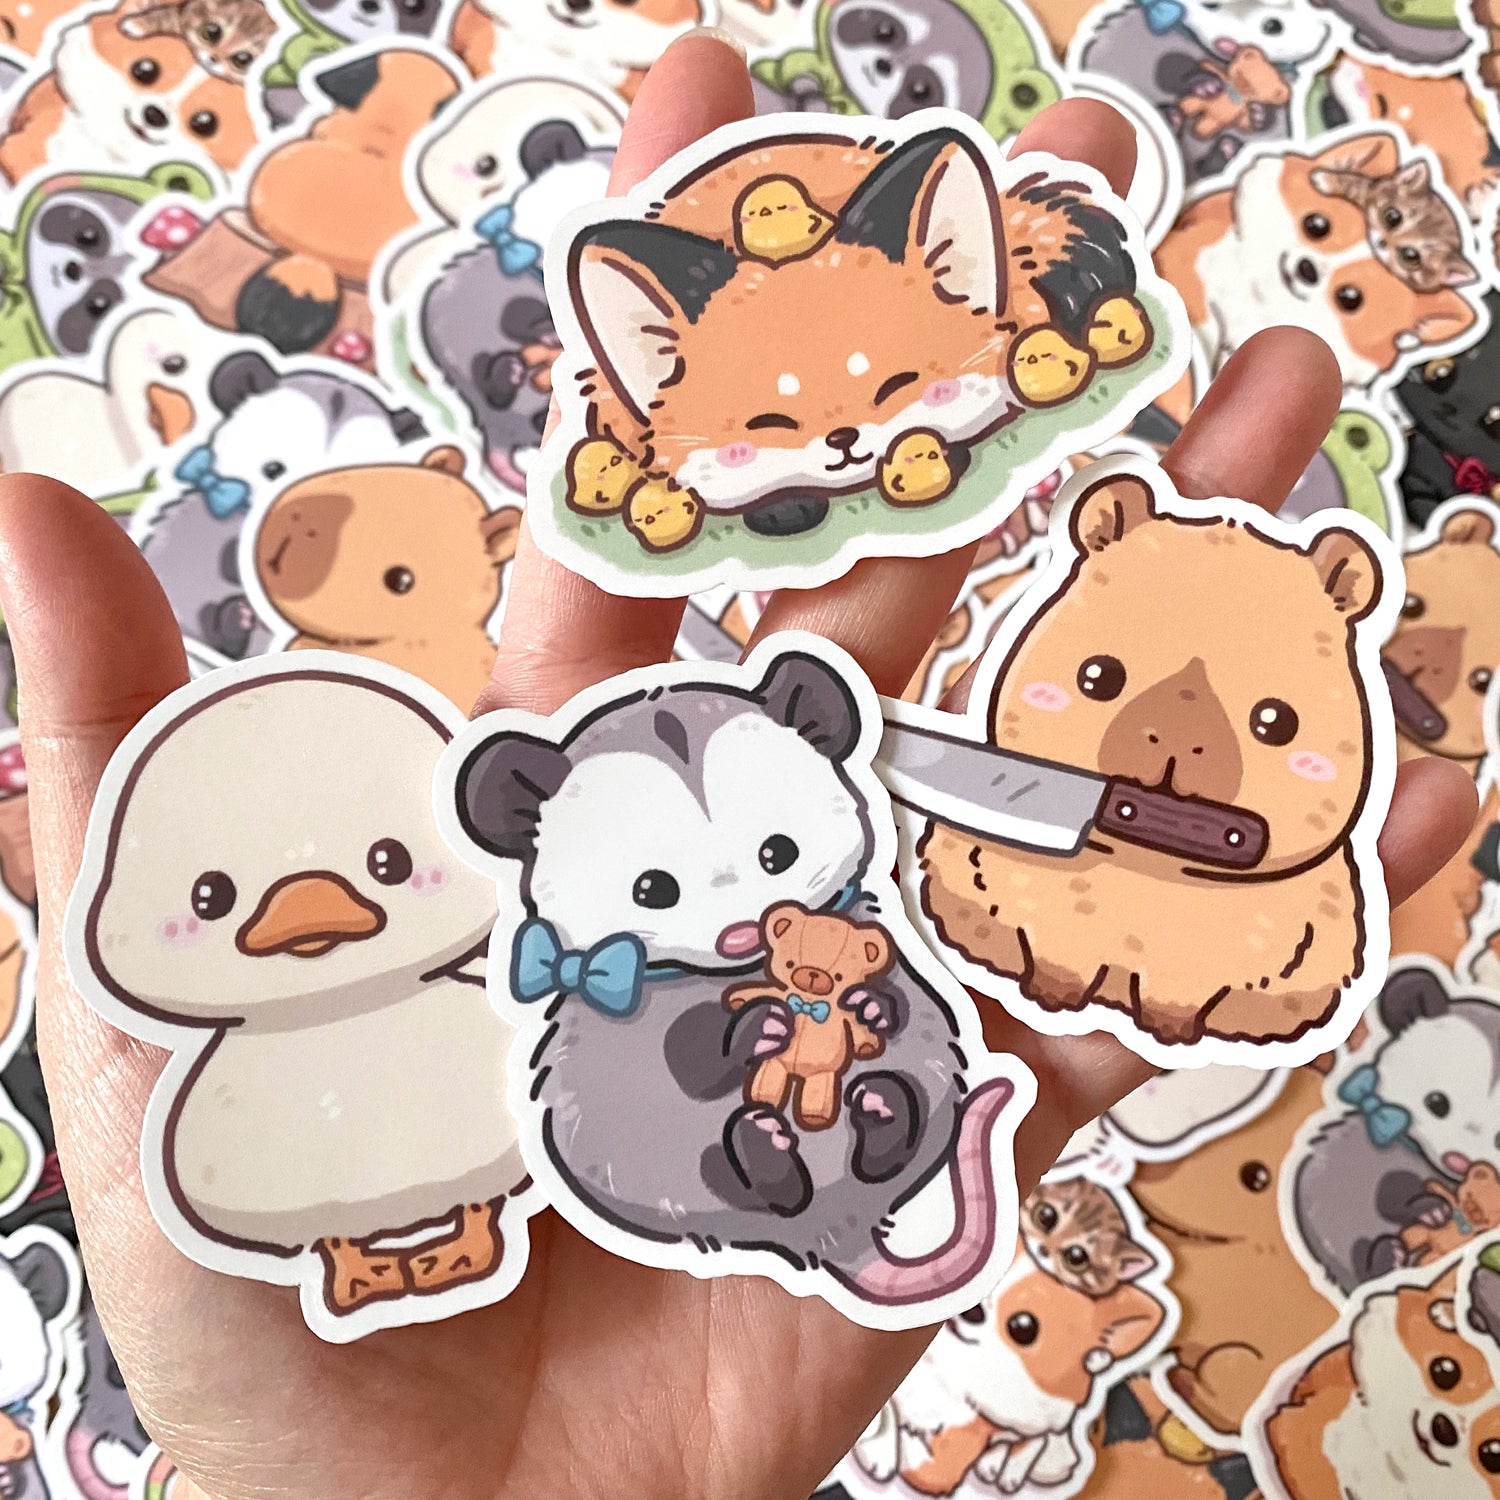 ALL STICKERS